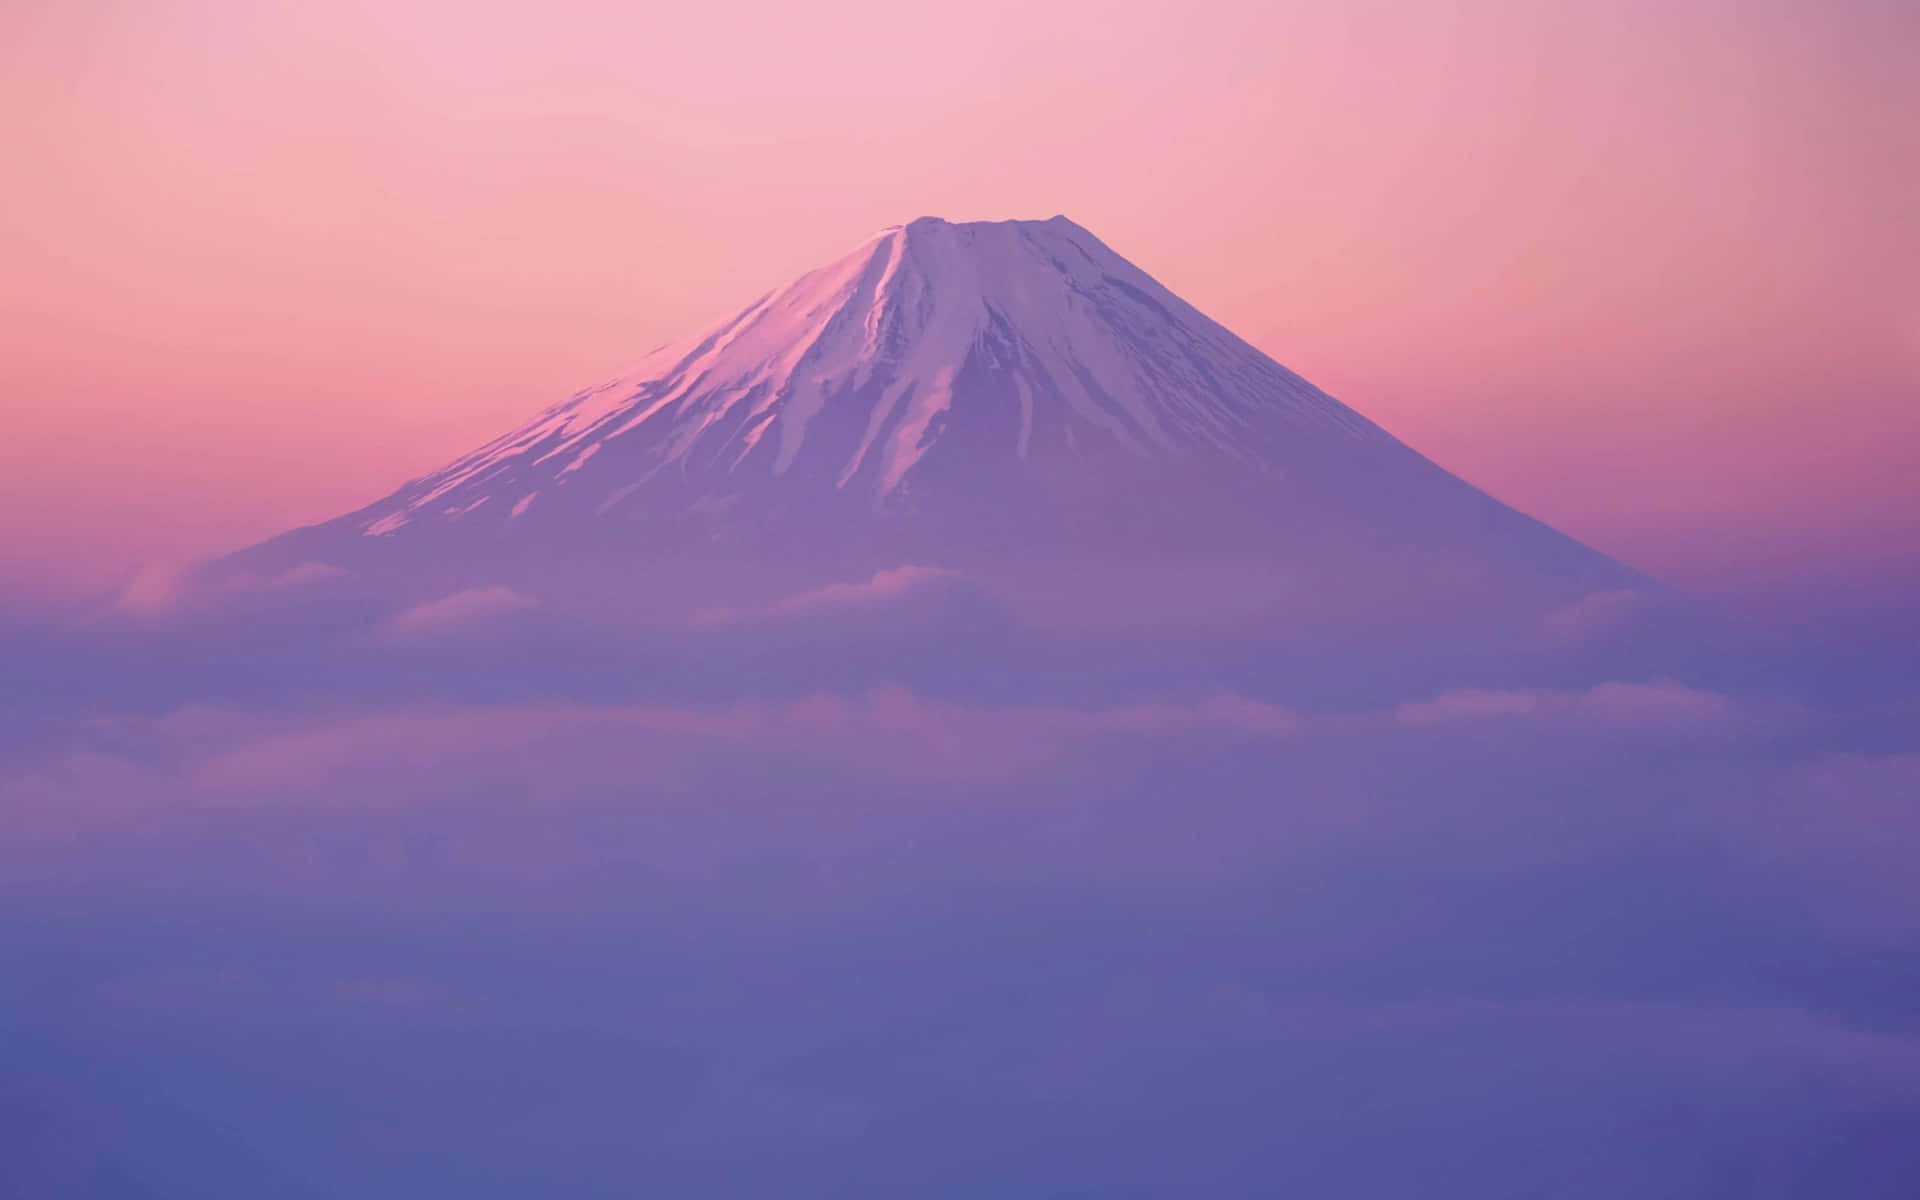 Nirvana at the picturesque Mt Fuji